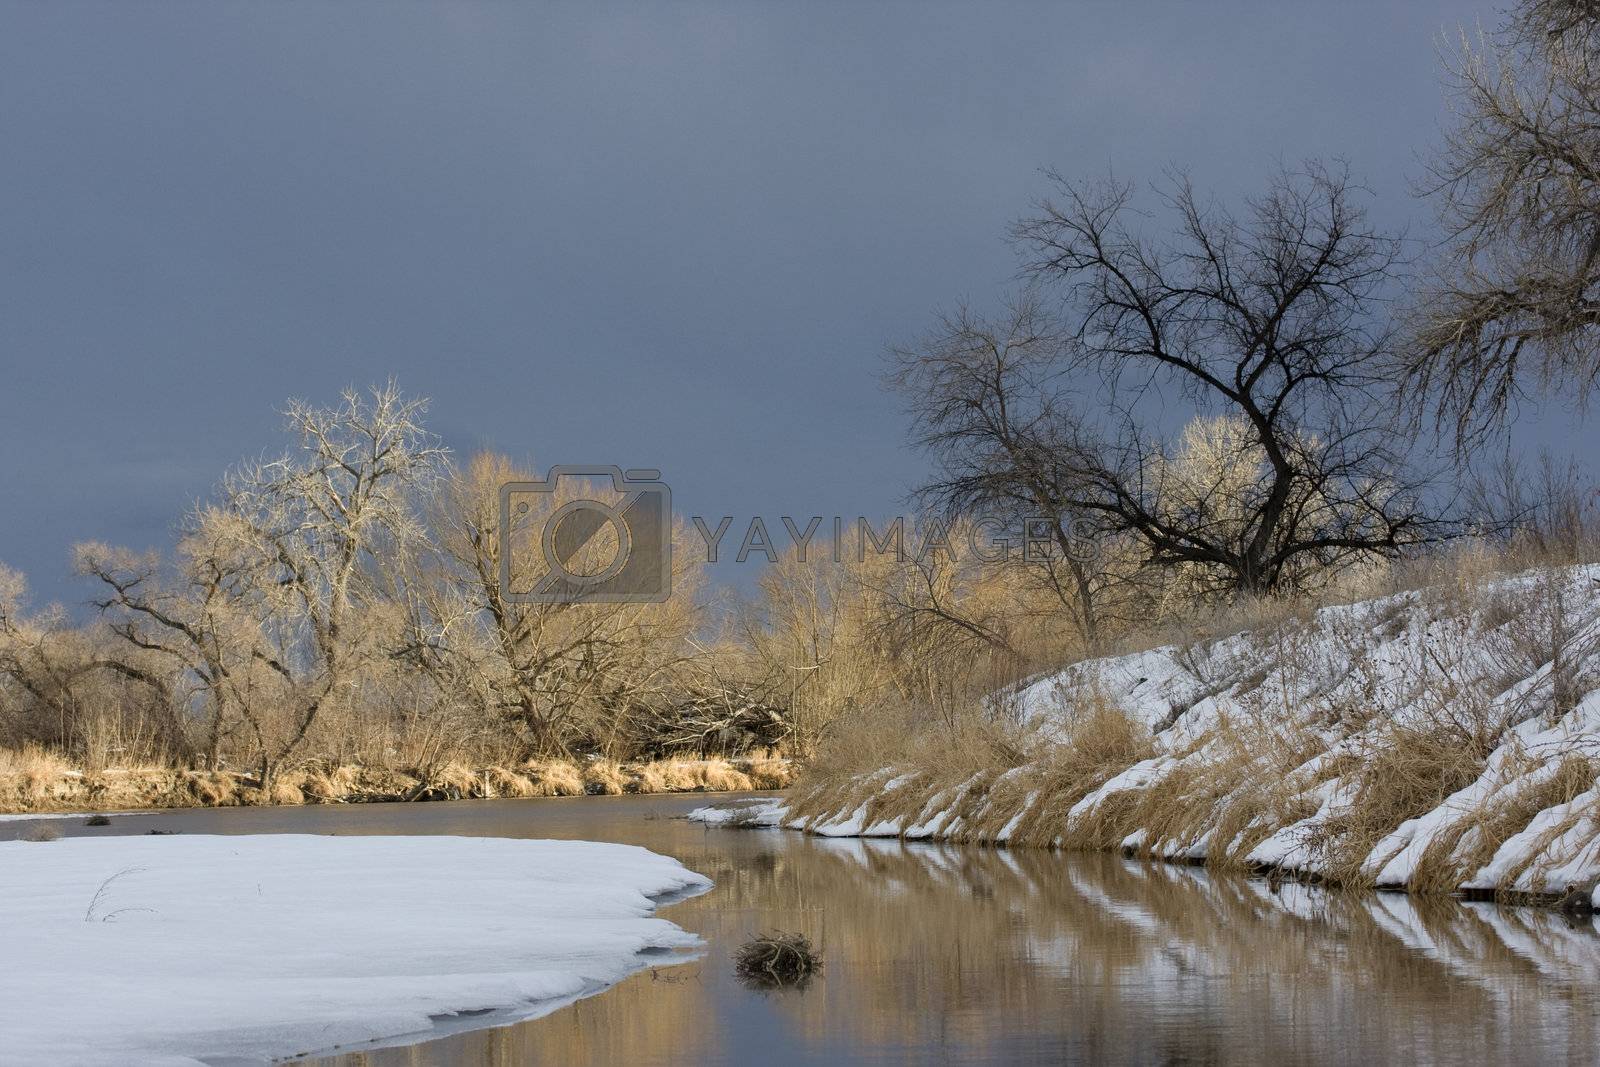 Royalty free image of Riparian forest along a river in Colorado prairies by PixelsAway